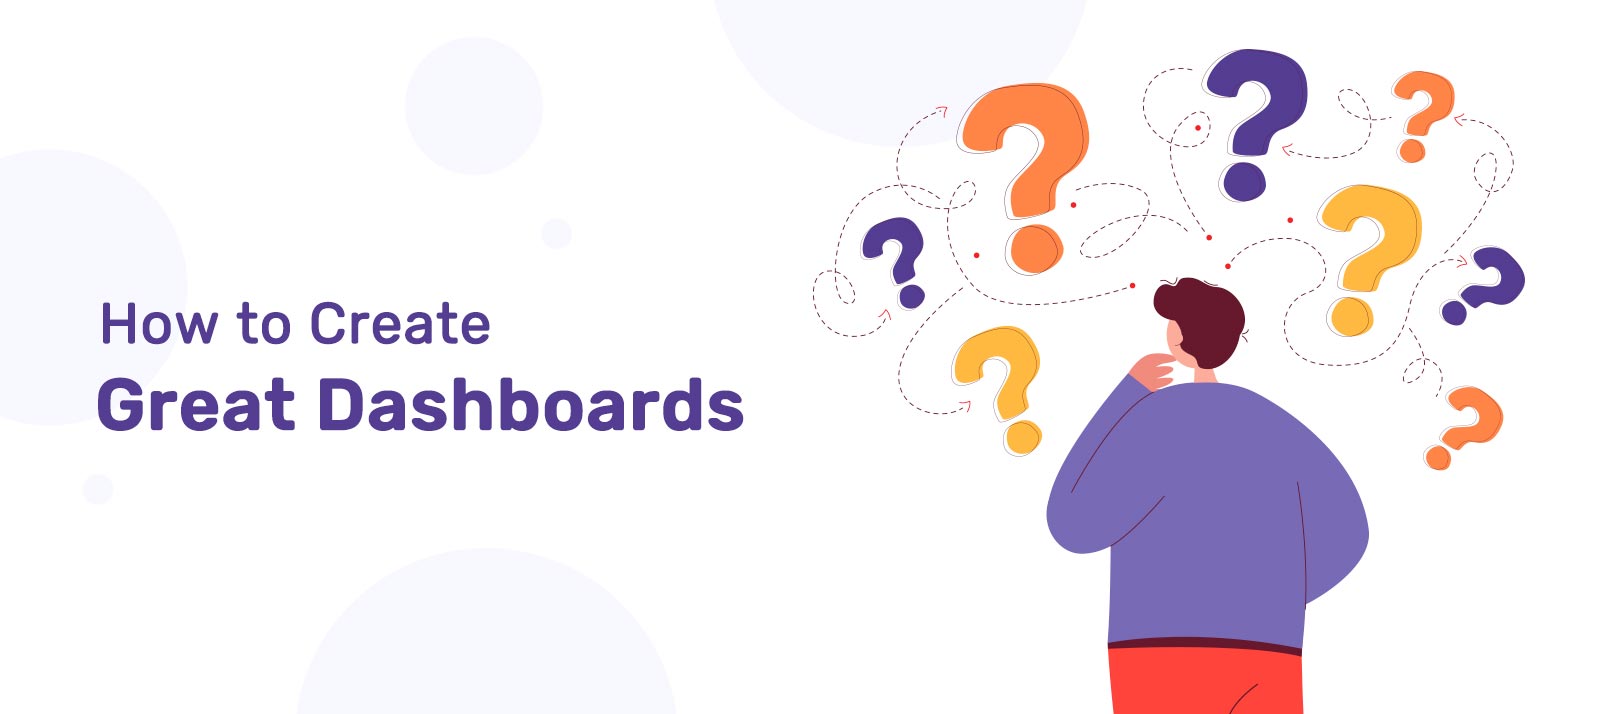  Dashboard Design Principles – How to Create Great Dashboards